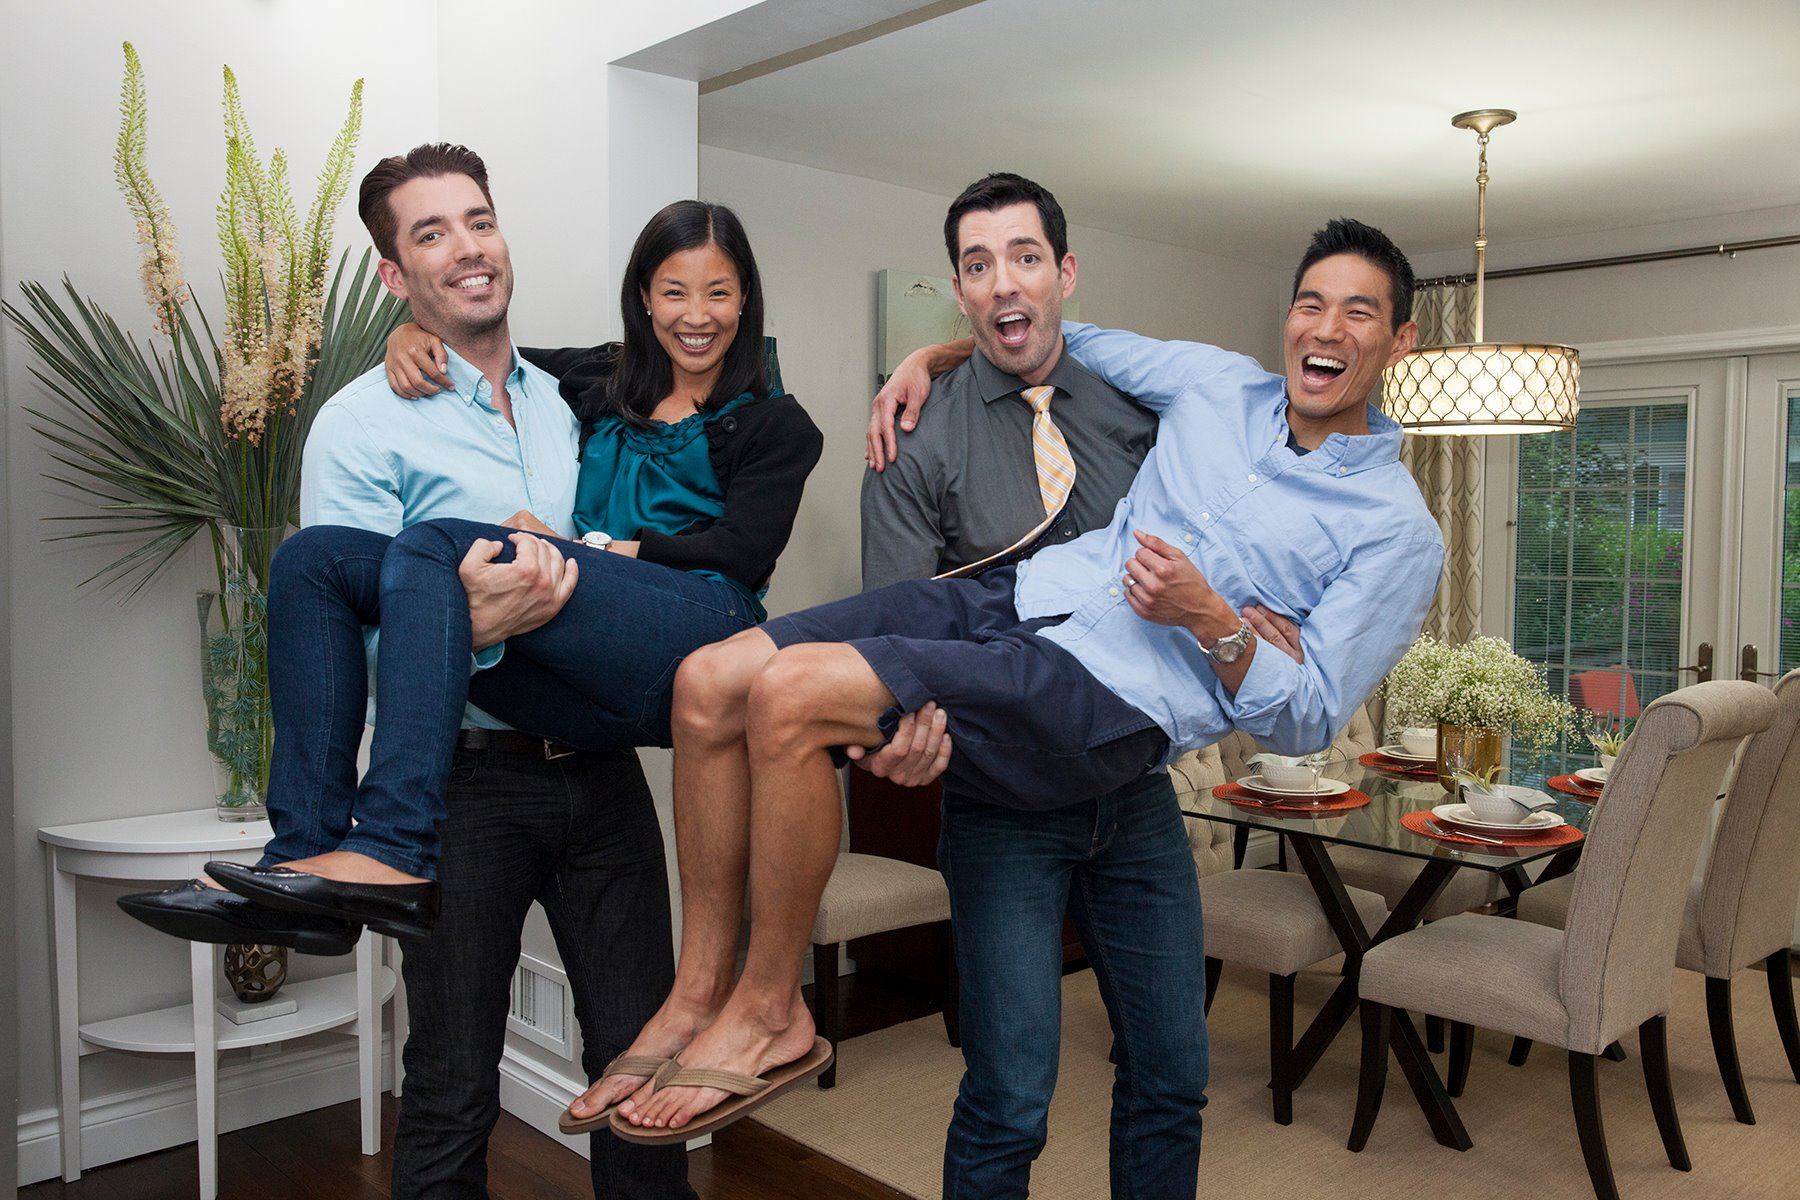 Think You Have What It Takes to Get Cast on ‘Property Brothers’?